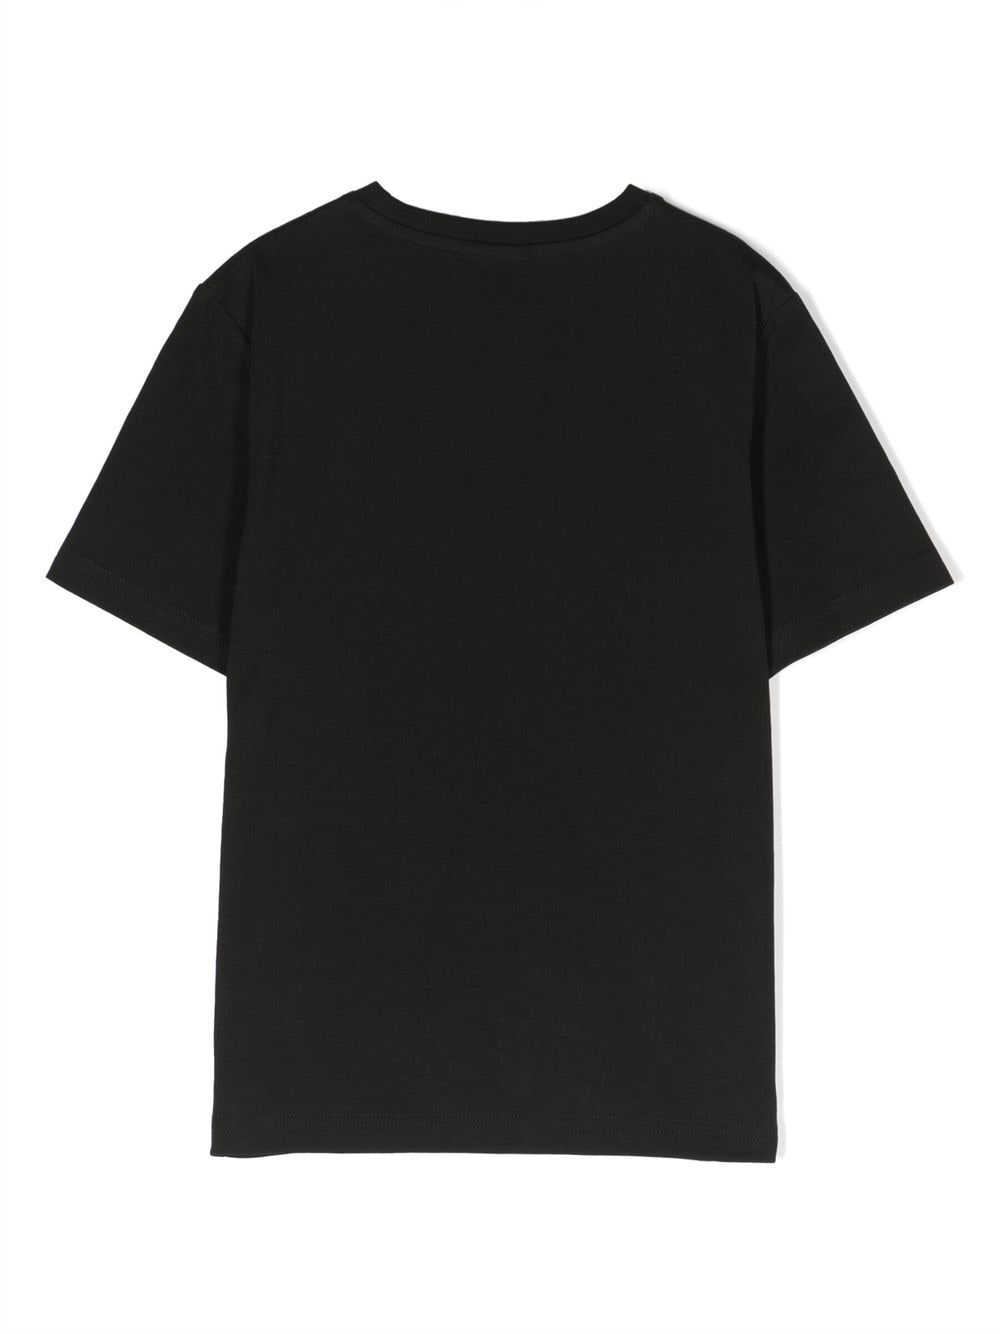 Black t-shirt for boys with small logo